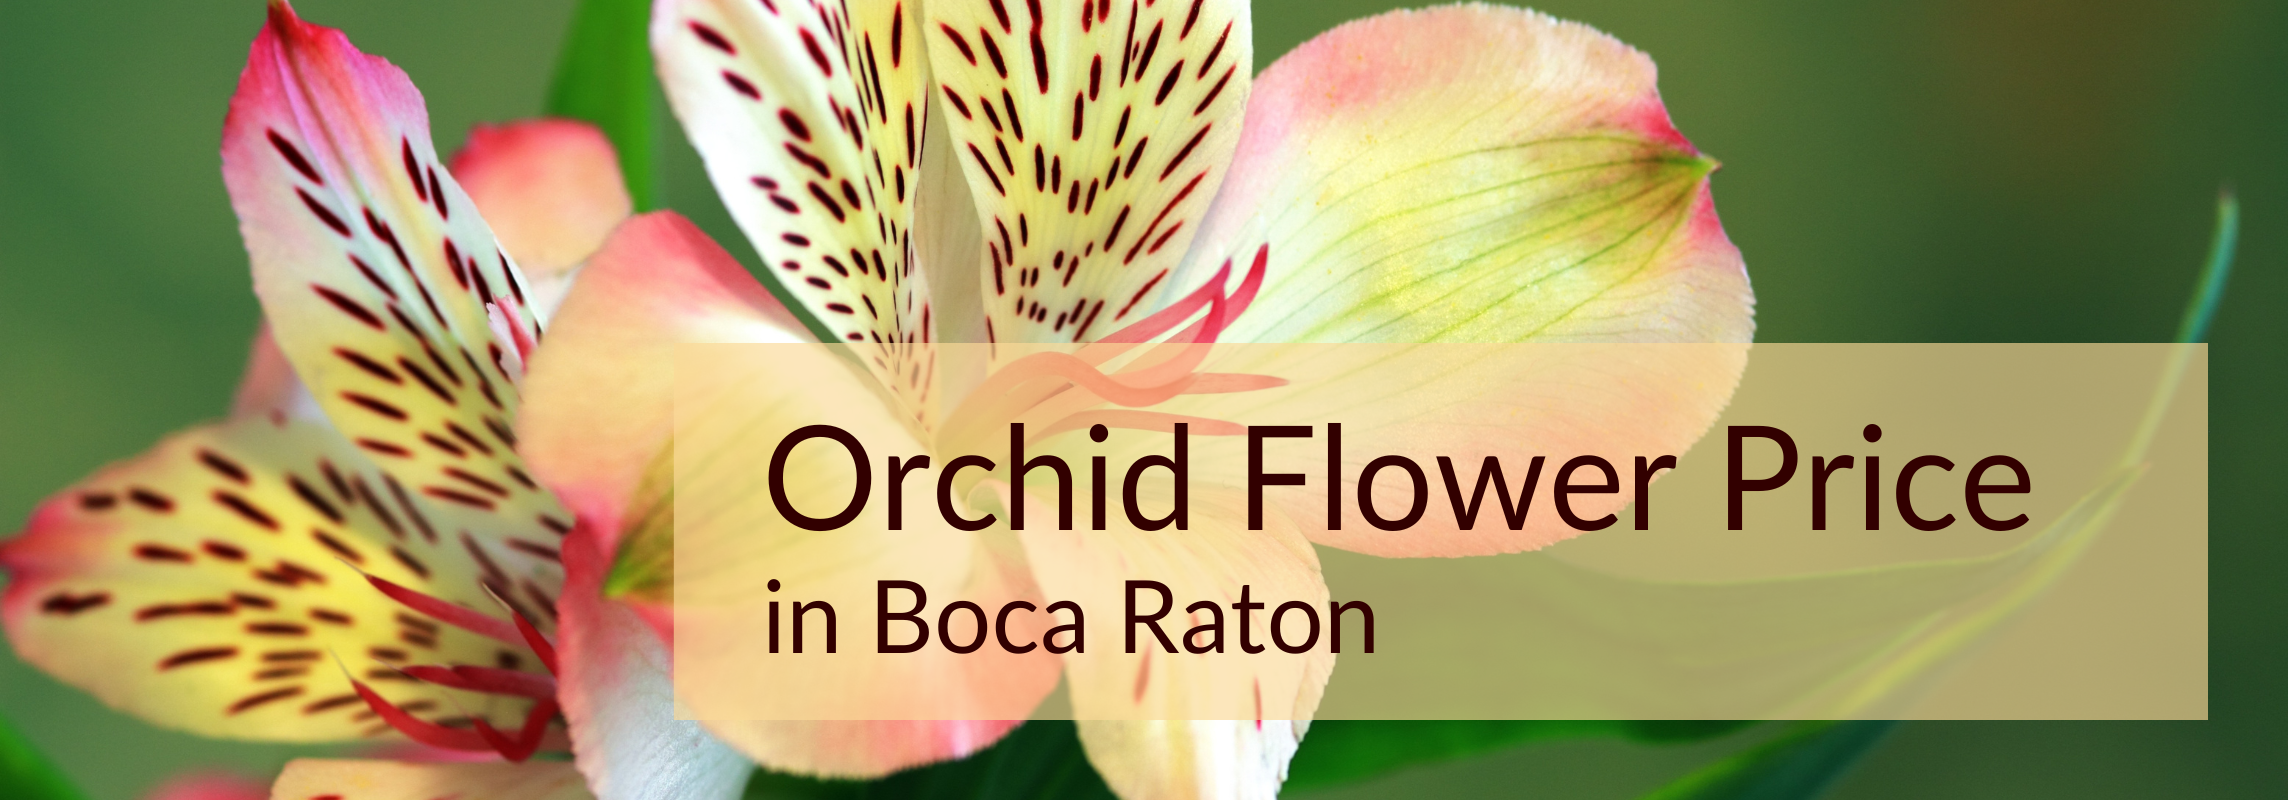 orchid flower price in Boca Raton